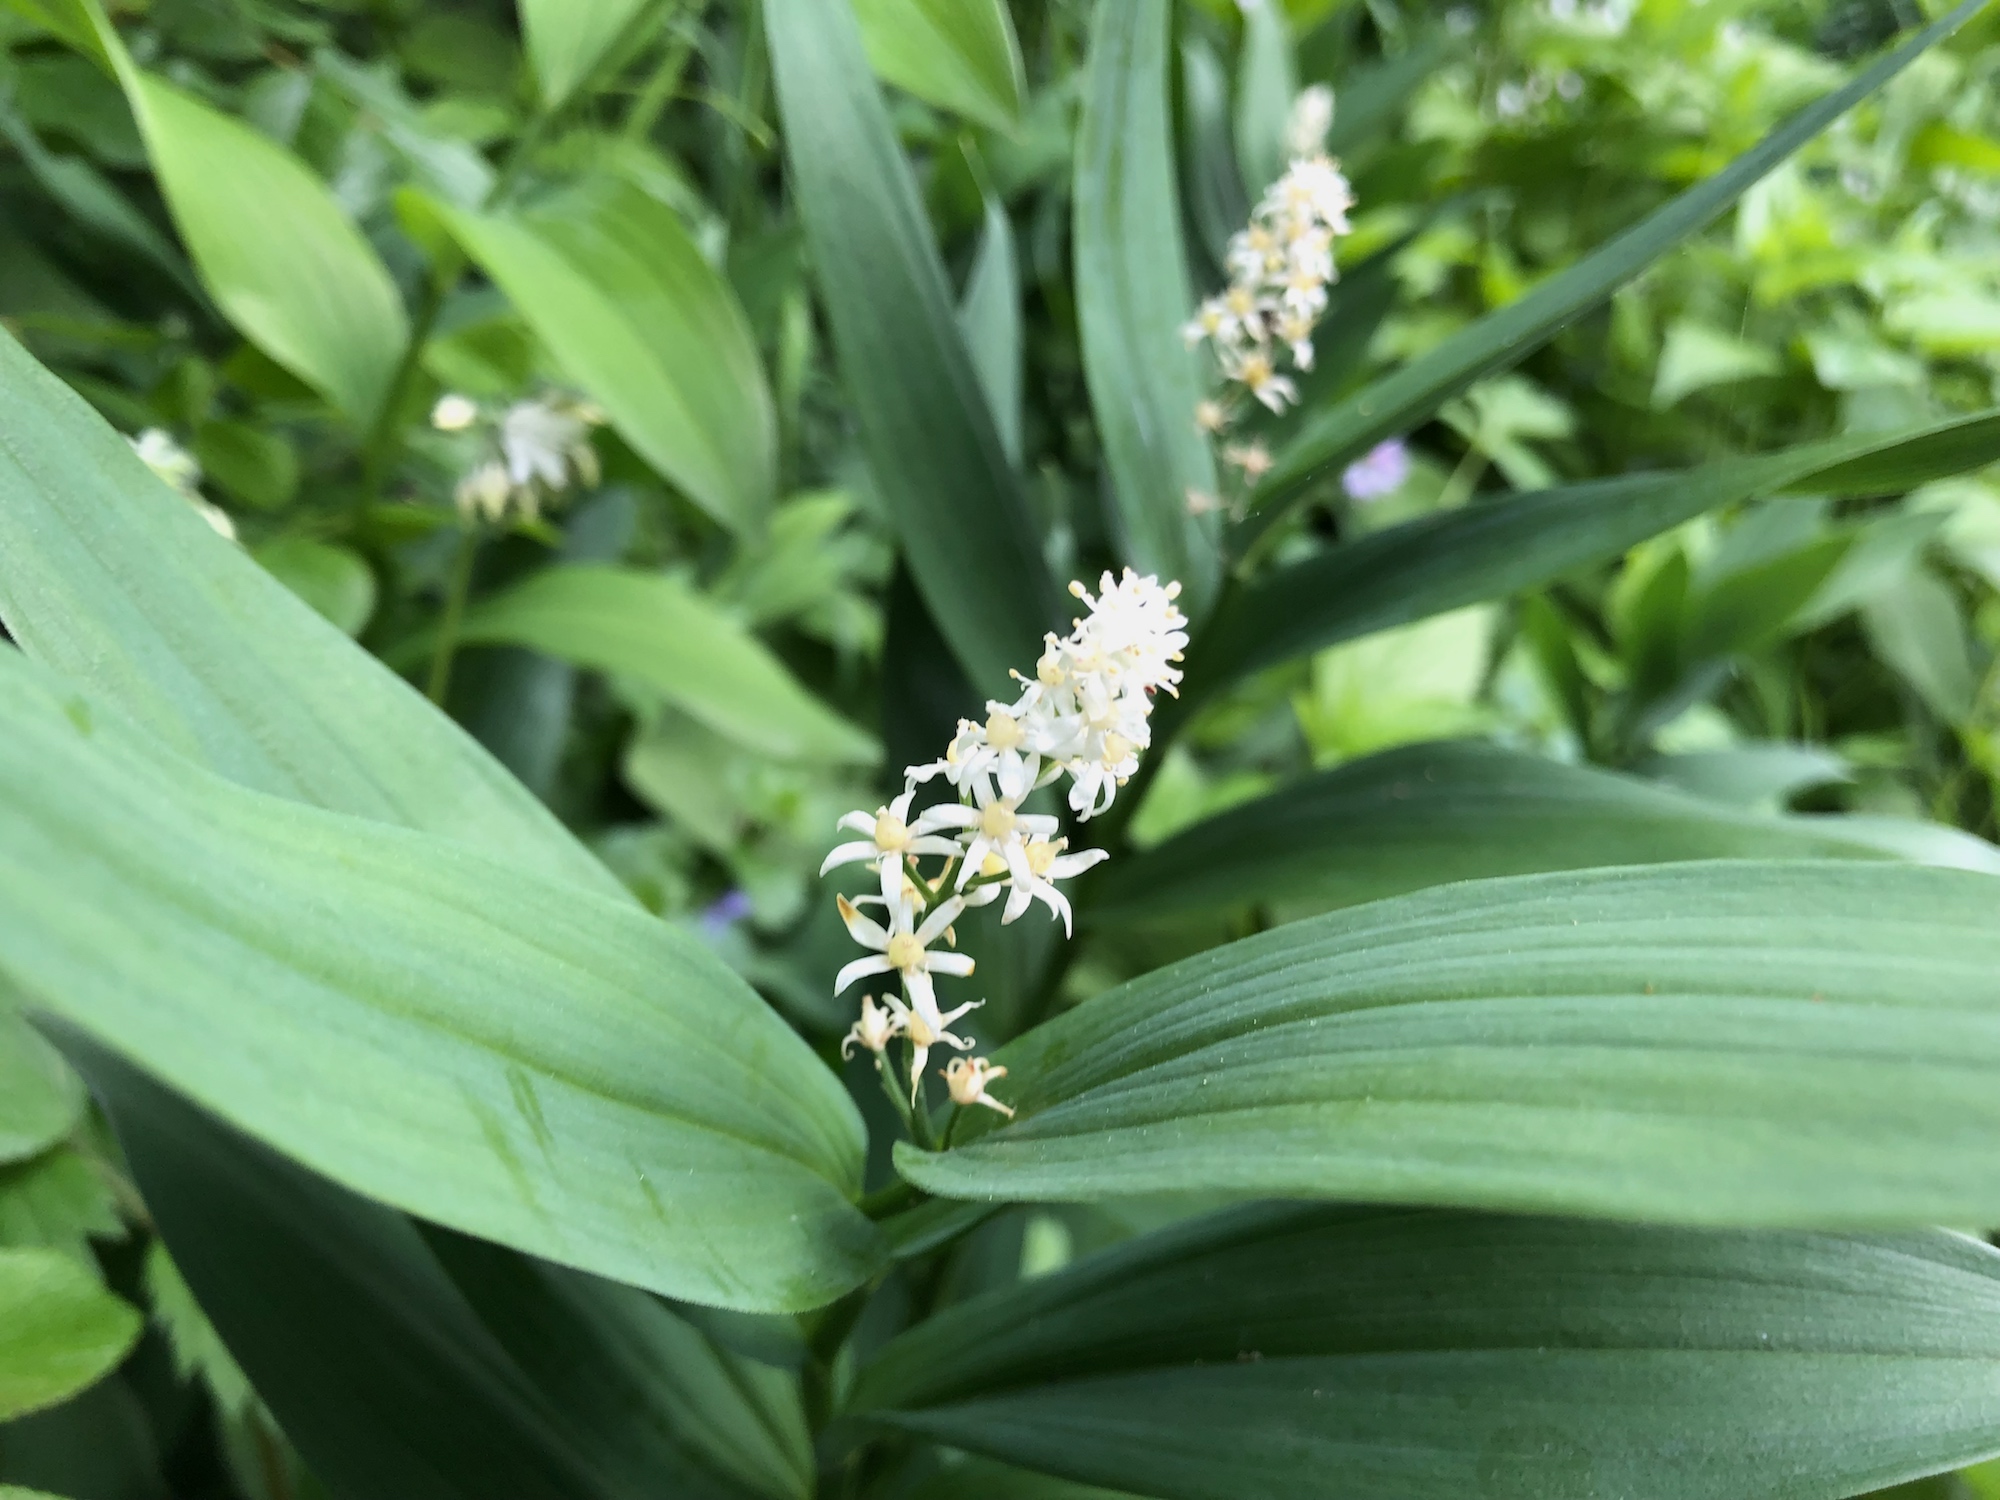 Starry False Solomon's Seal near Duck Pond in Madison, Wisconsin on May 26, 2019.